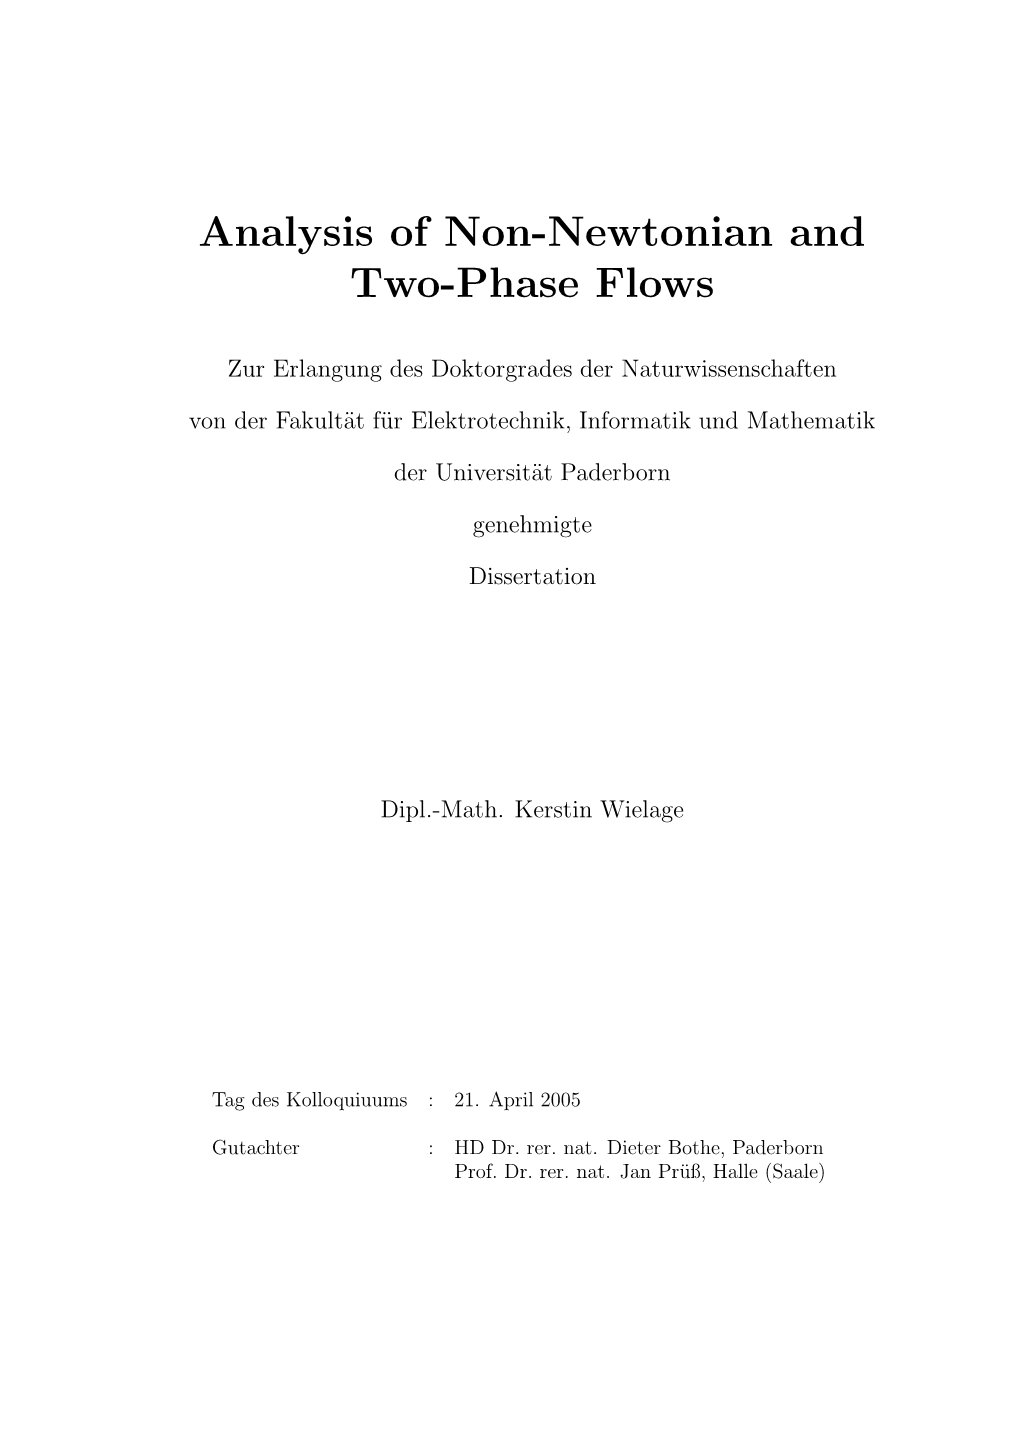 Analysis of Non-Newtonian and Two-Phase Flows